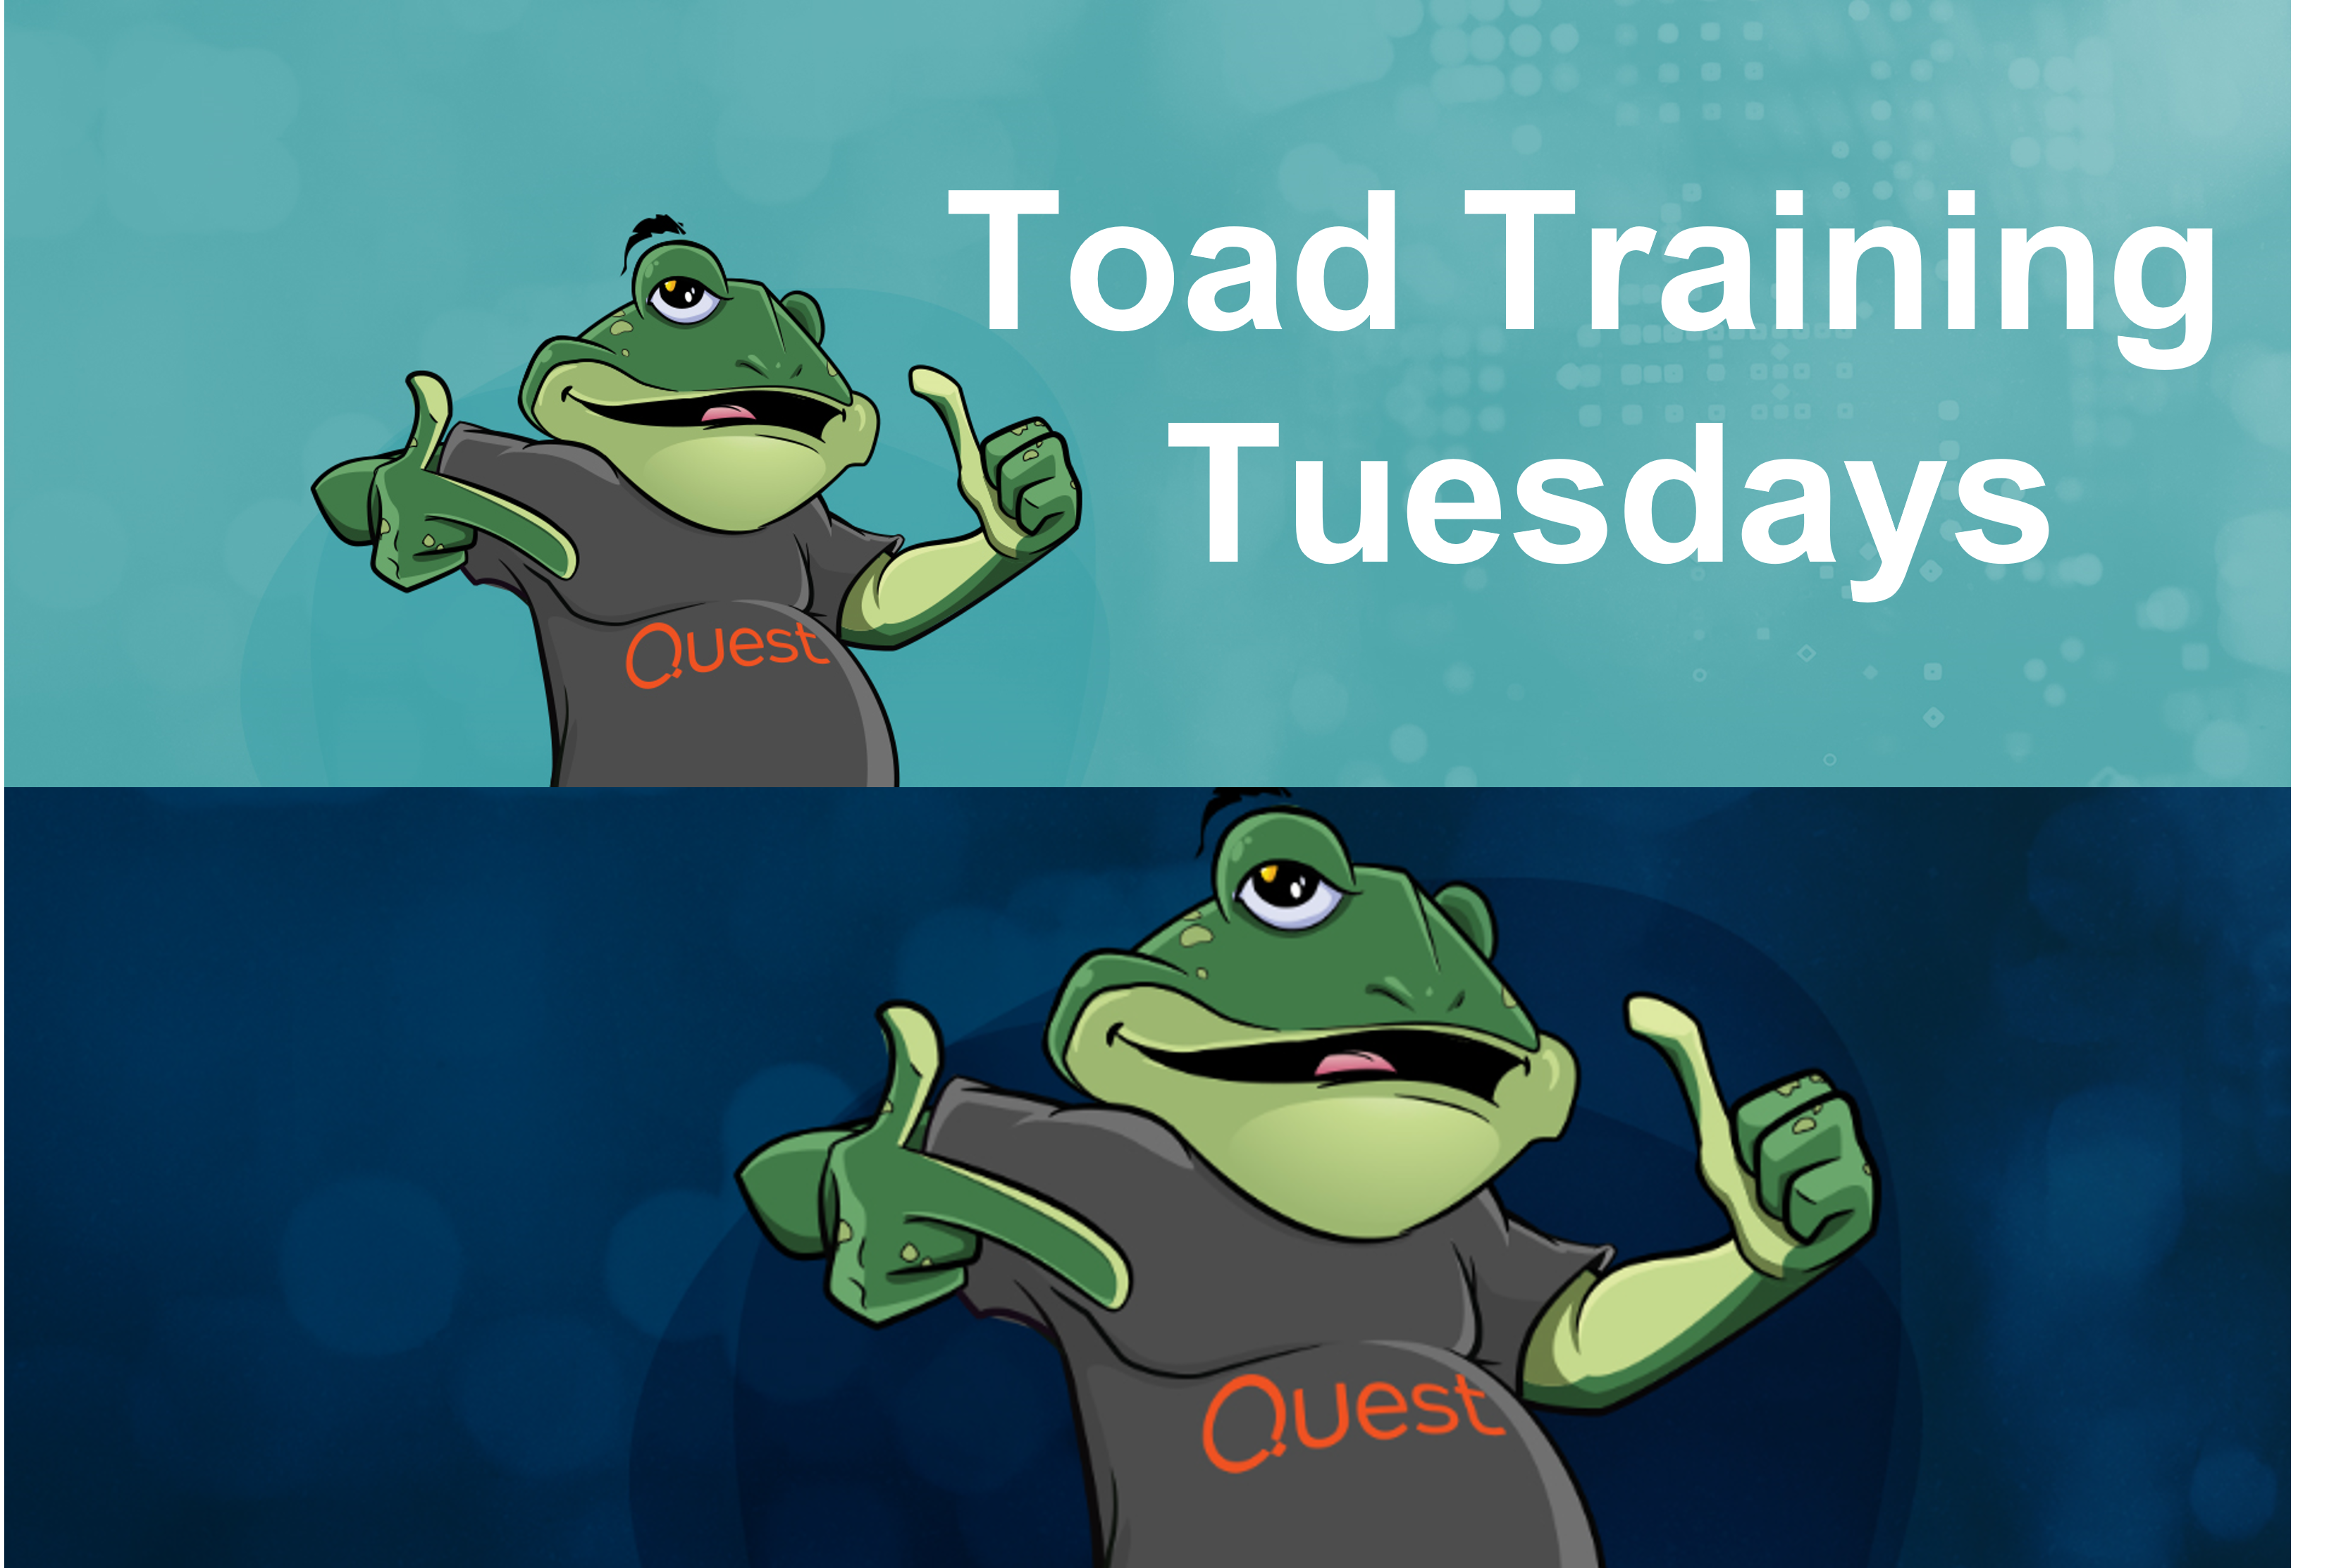 Toad_Training_Tuesdays-1